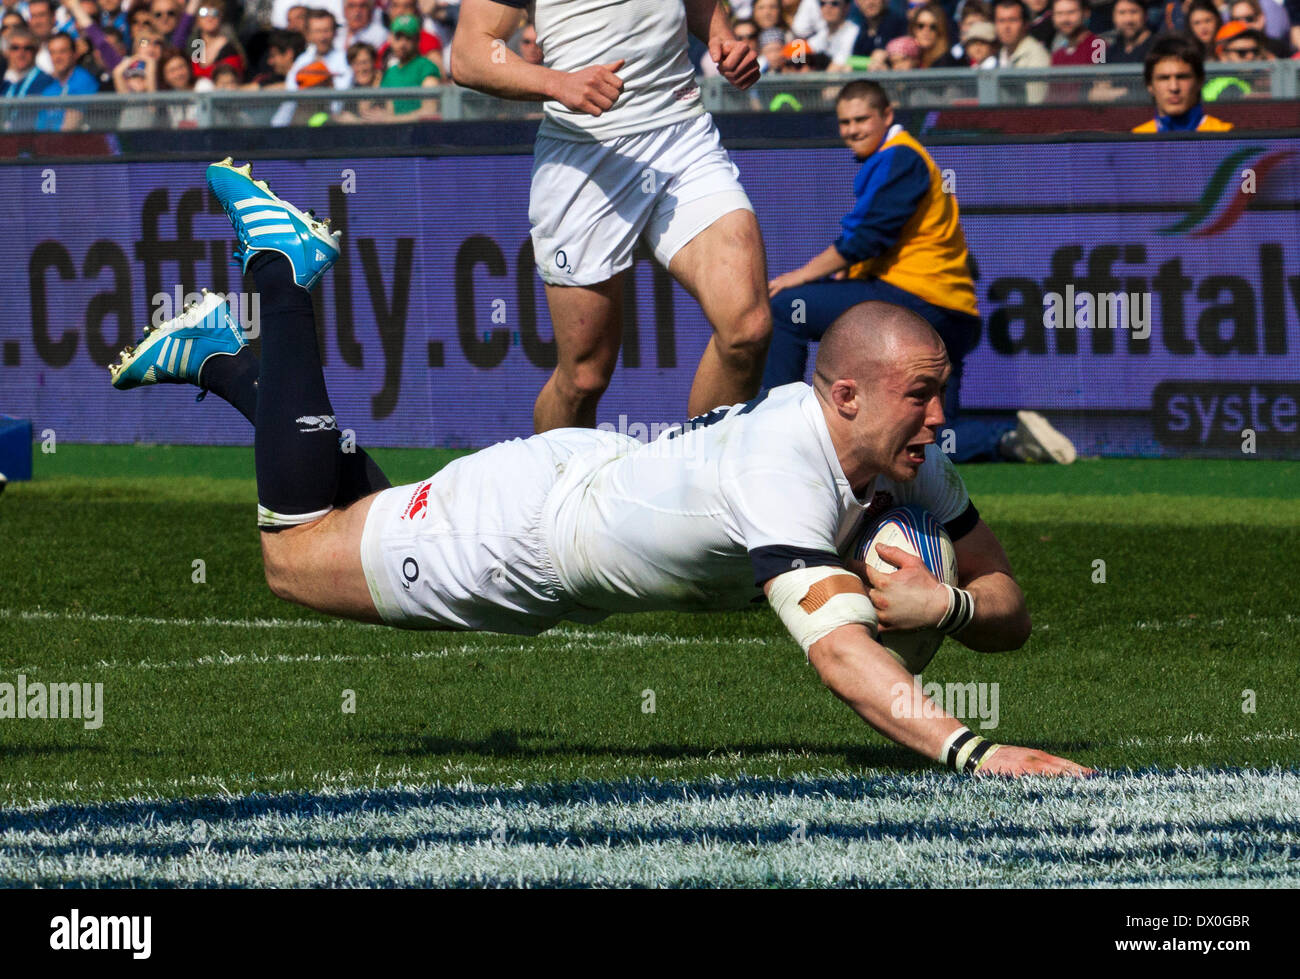 Italy v England. RBS 6 Nations rugby, Rome, Italy. England beat Italy by 52 points to 11 at the Stadio Olimpico. Mike Brown  scores England's second try. Stock Photo